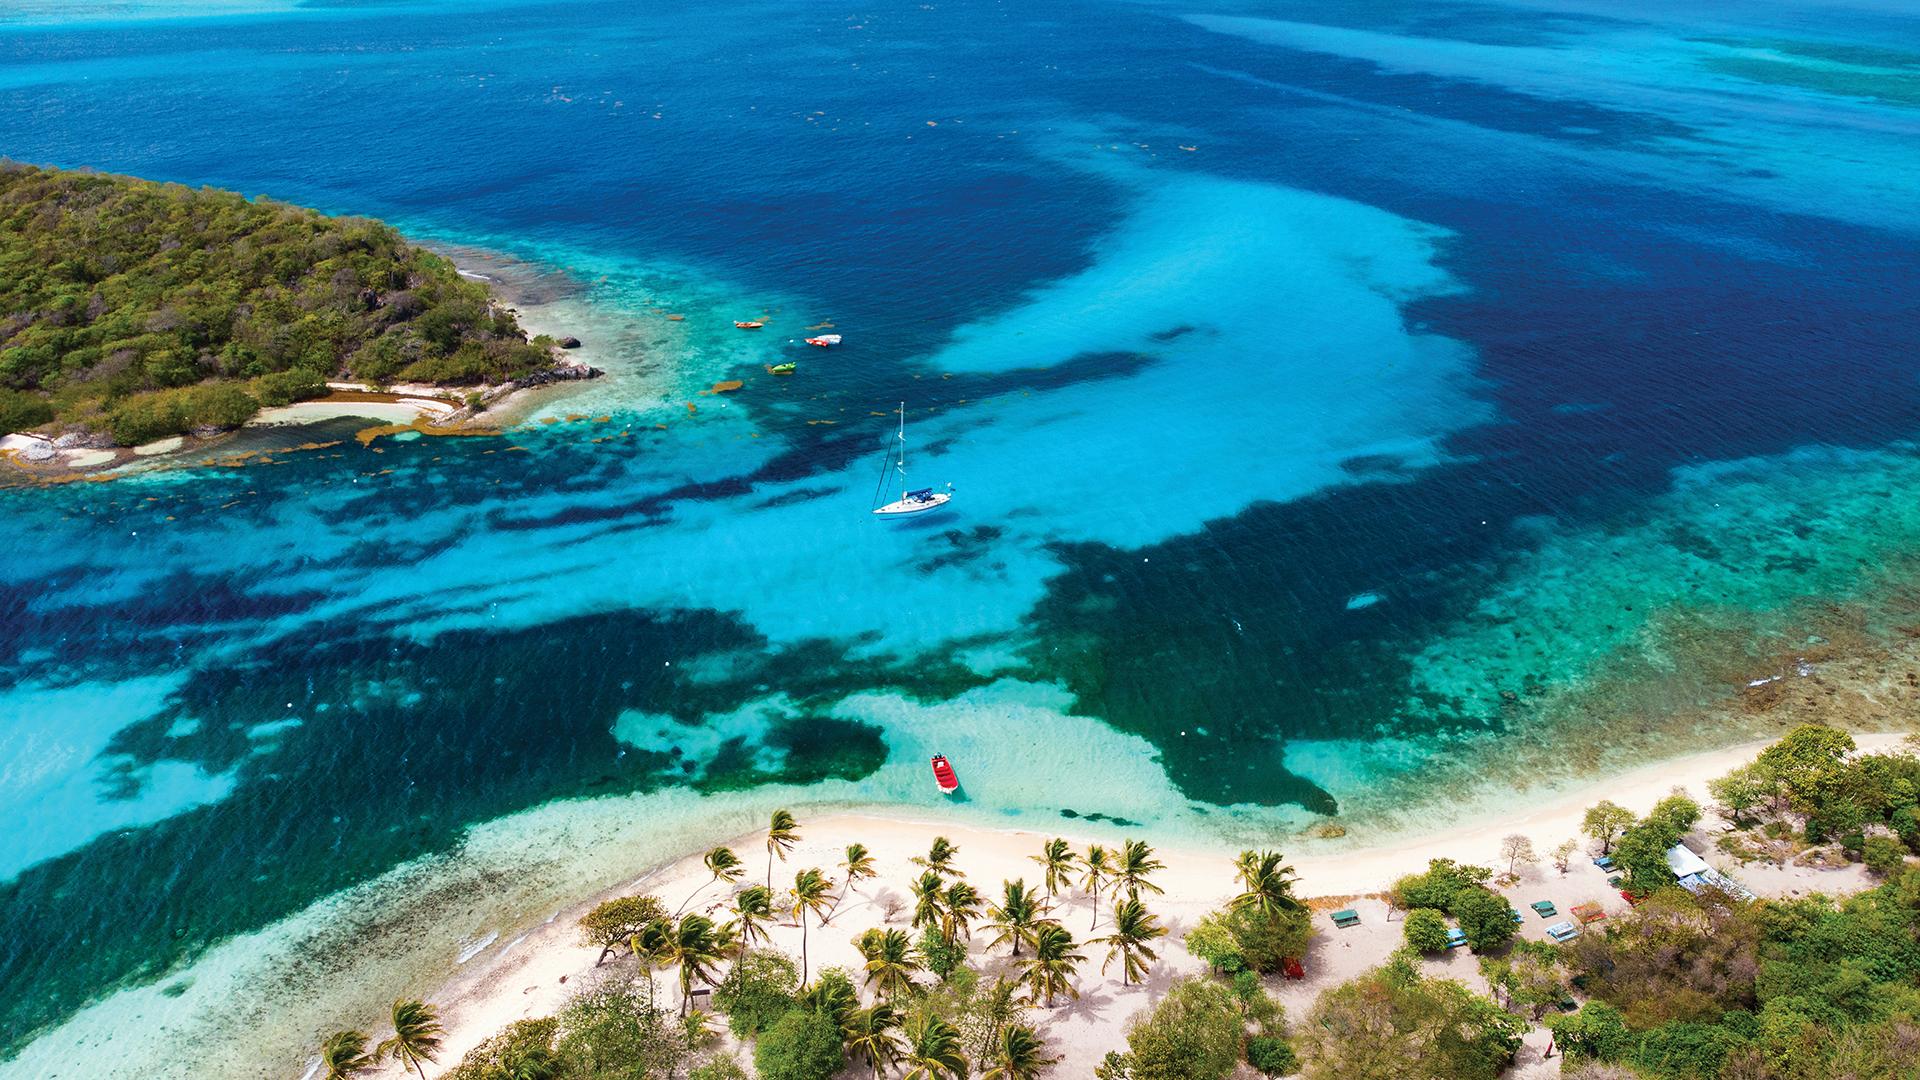 The best Caribbean islands to visit | A bird's eye view of St. Vincent and the Grenadines